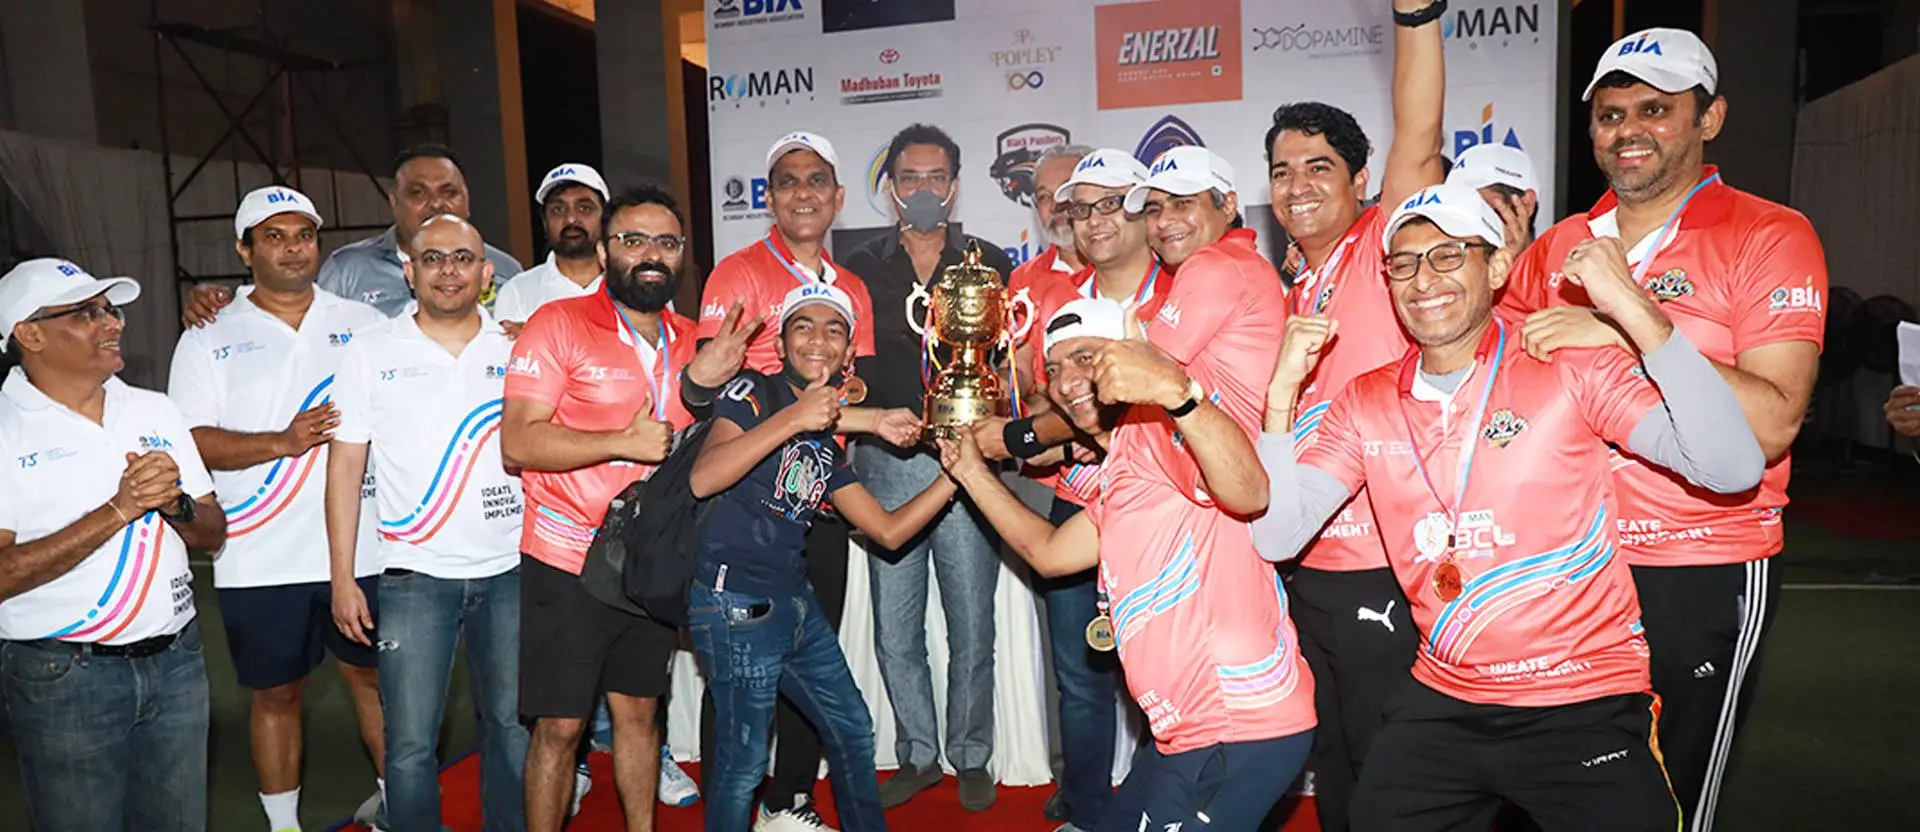 The winning team with trophy - Roman BIA Cricket League organised by Bombay Industries Association BIA under the Presidency of Mr. Nevil Sanghvi